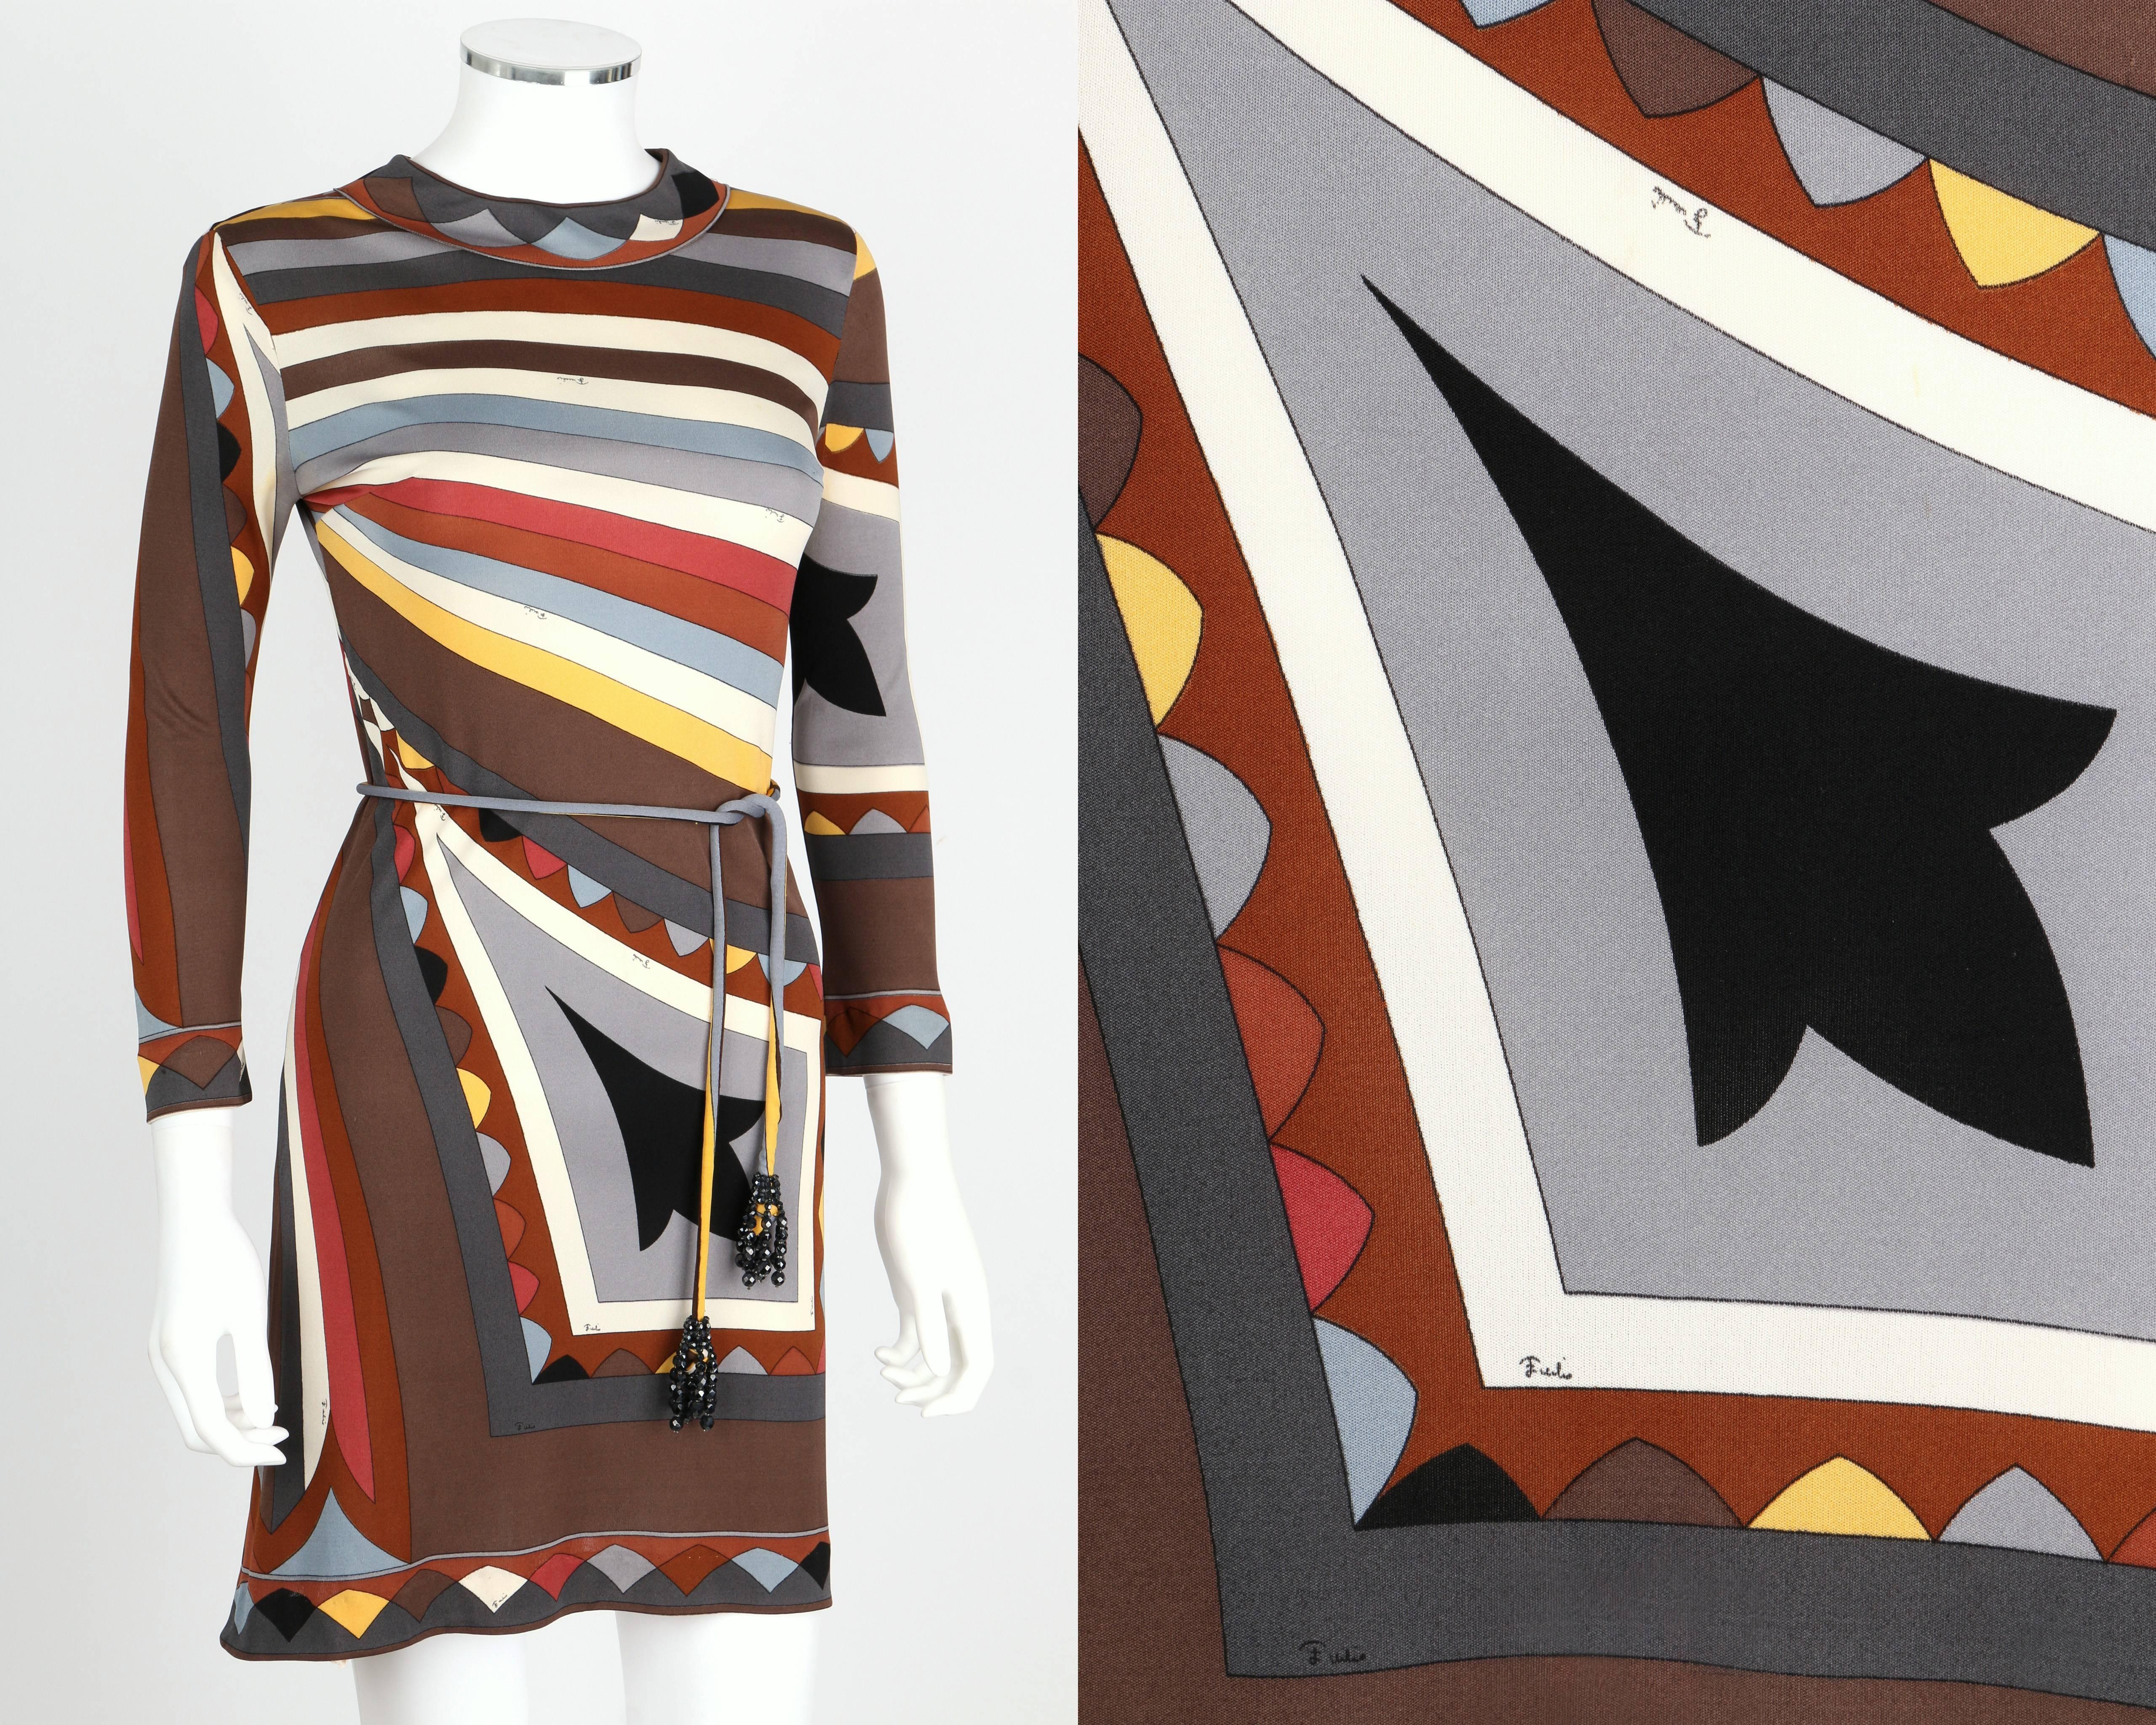 Vintage early 1960s Emilio Pucci multicolor signature print silk jersey dress. Three-quarter length sleeves. Jewel neckline. Zips at back. Matching Coppola e Toppo sash belt with beaded crystal detail. Marked Fabric Content:  